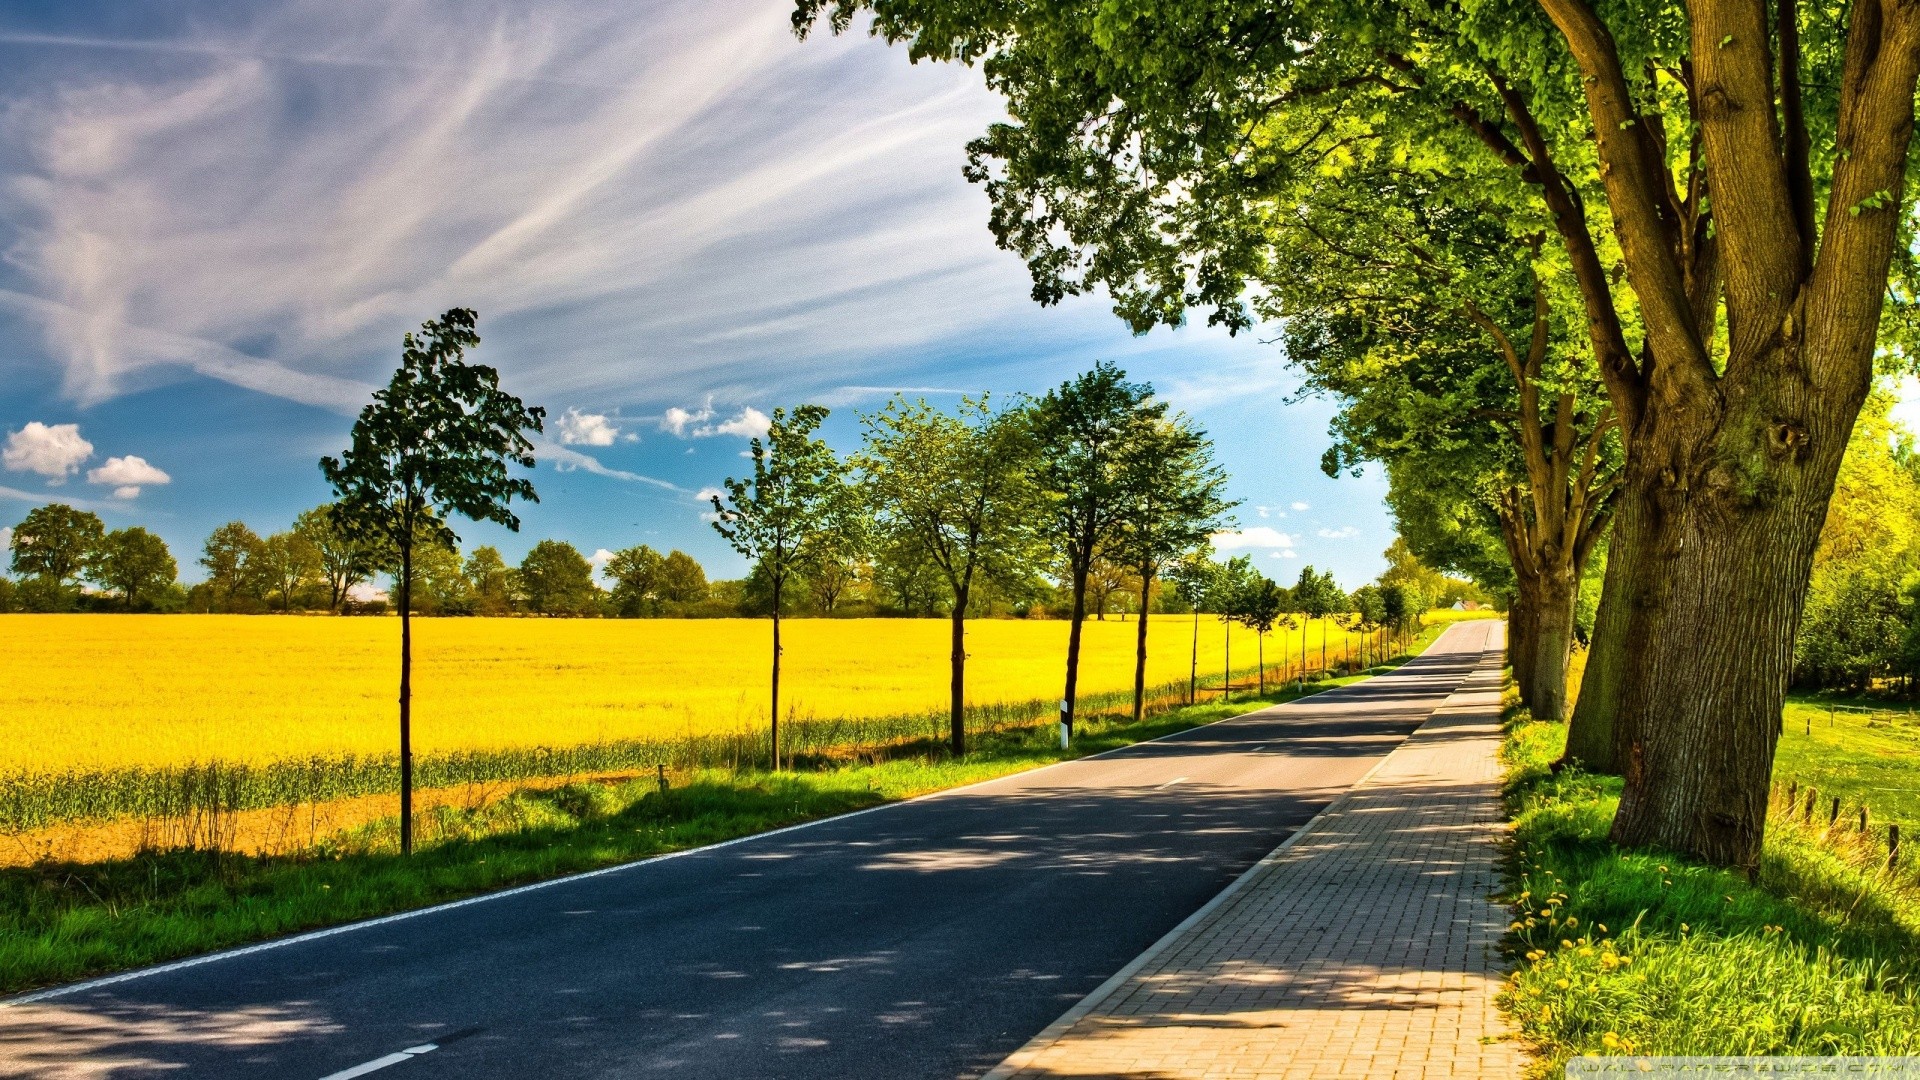 Summer Road View Scene Fun Landscape Pics Of Nature Hd Wallpapers ...